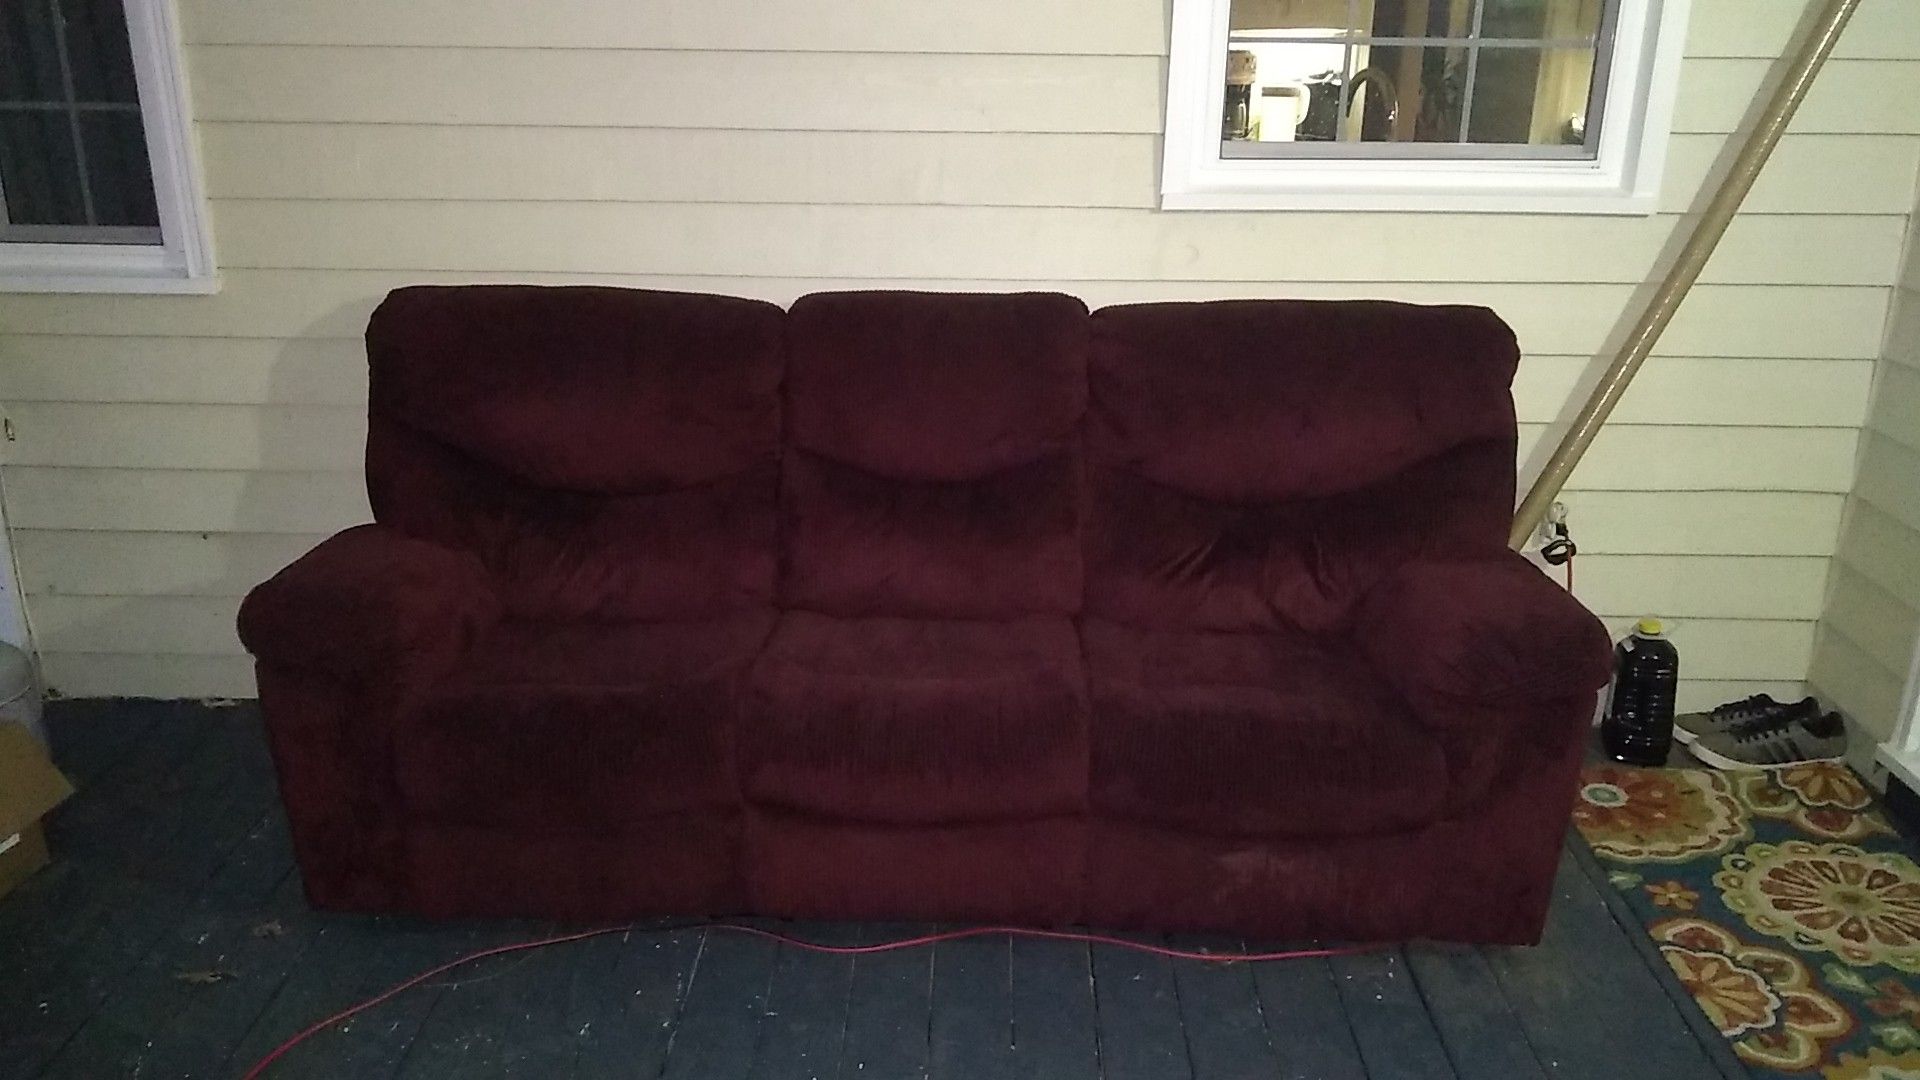 Power couch (needs cord for power)